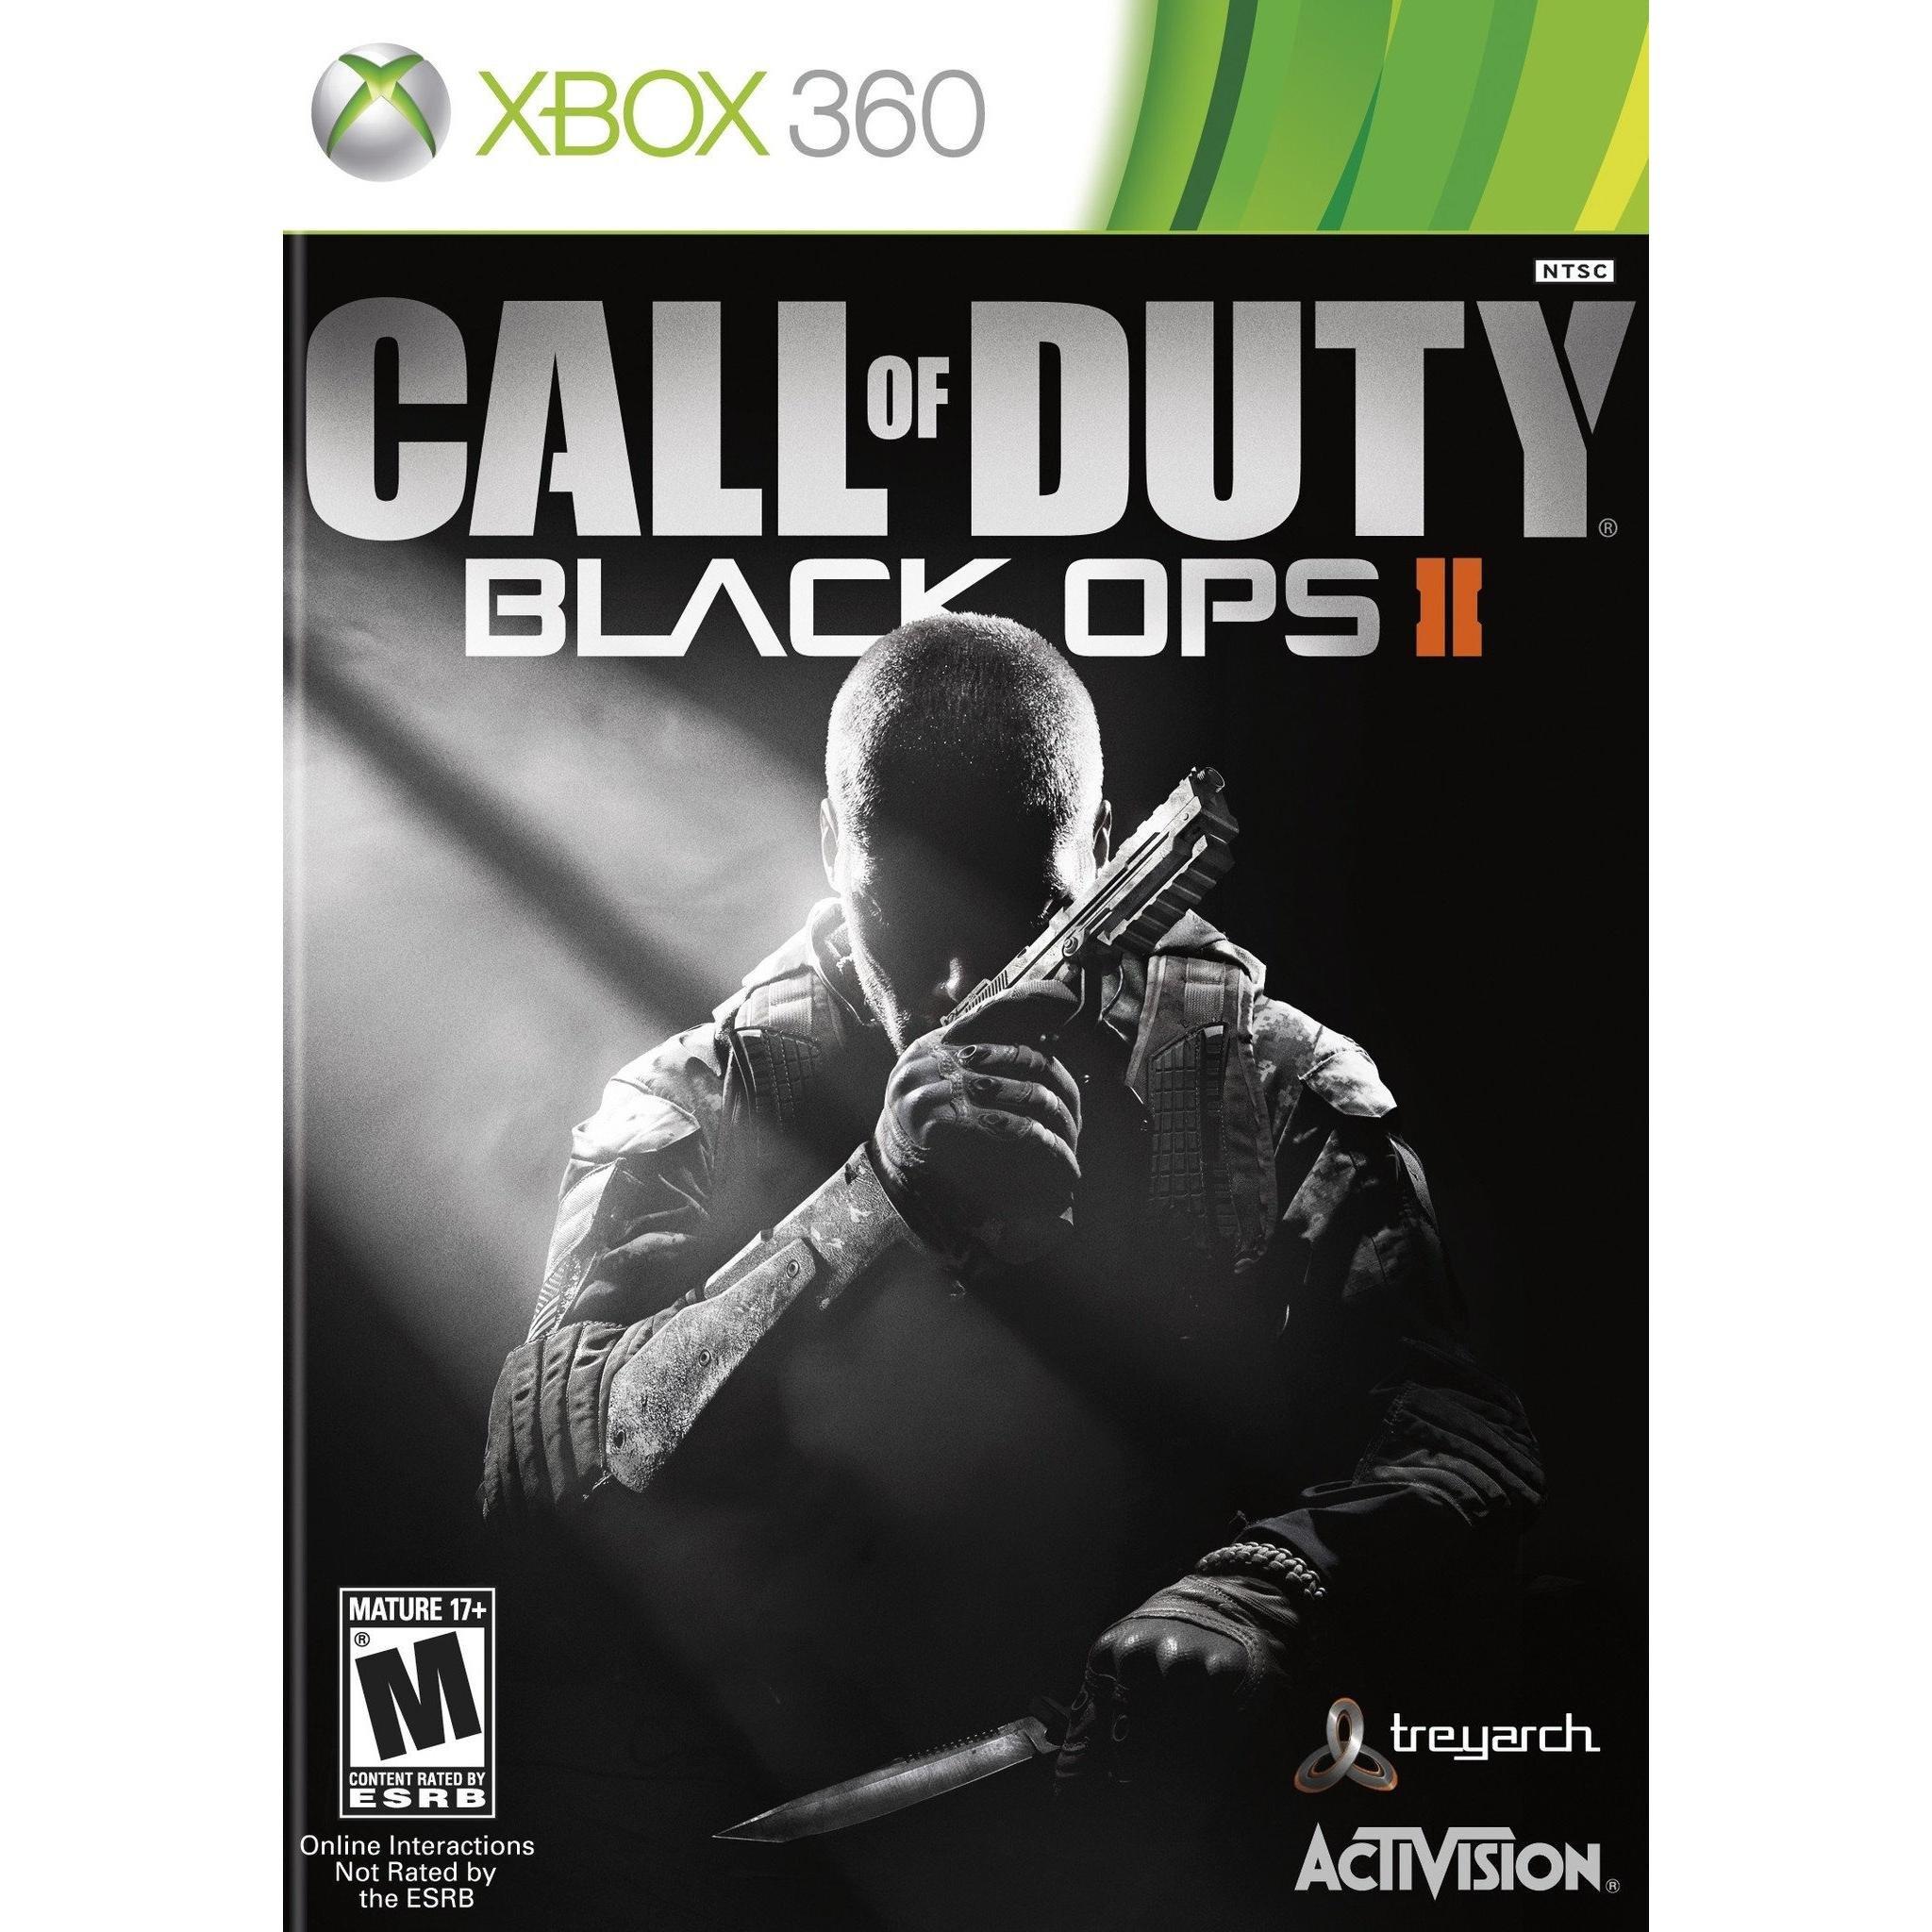 Best of Call of duty black ops pics